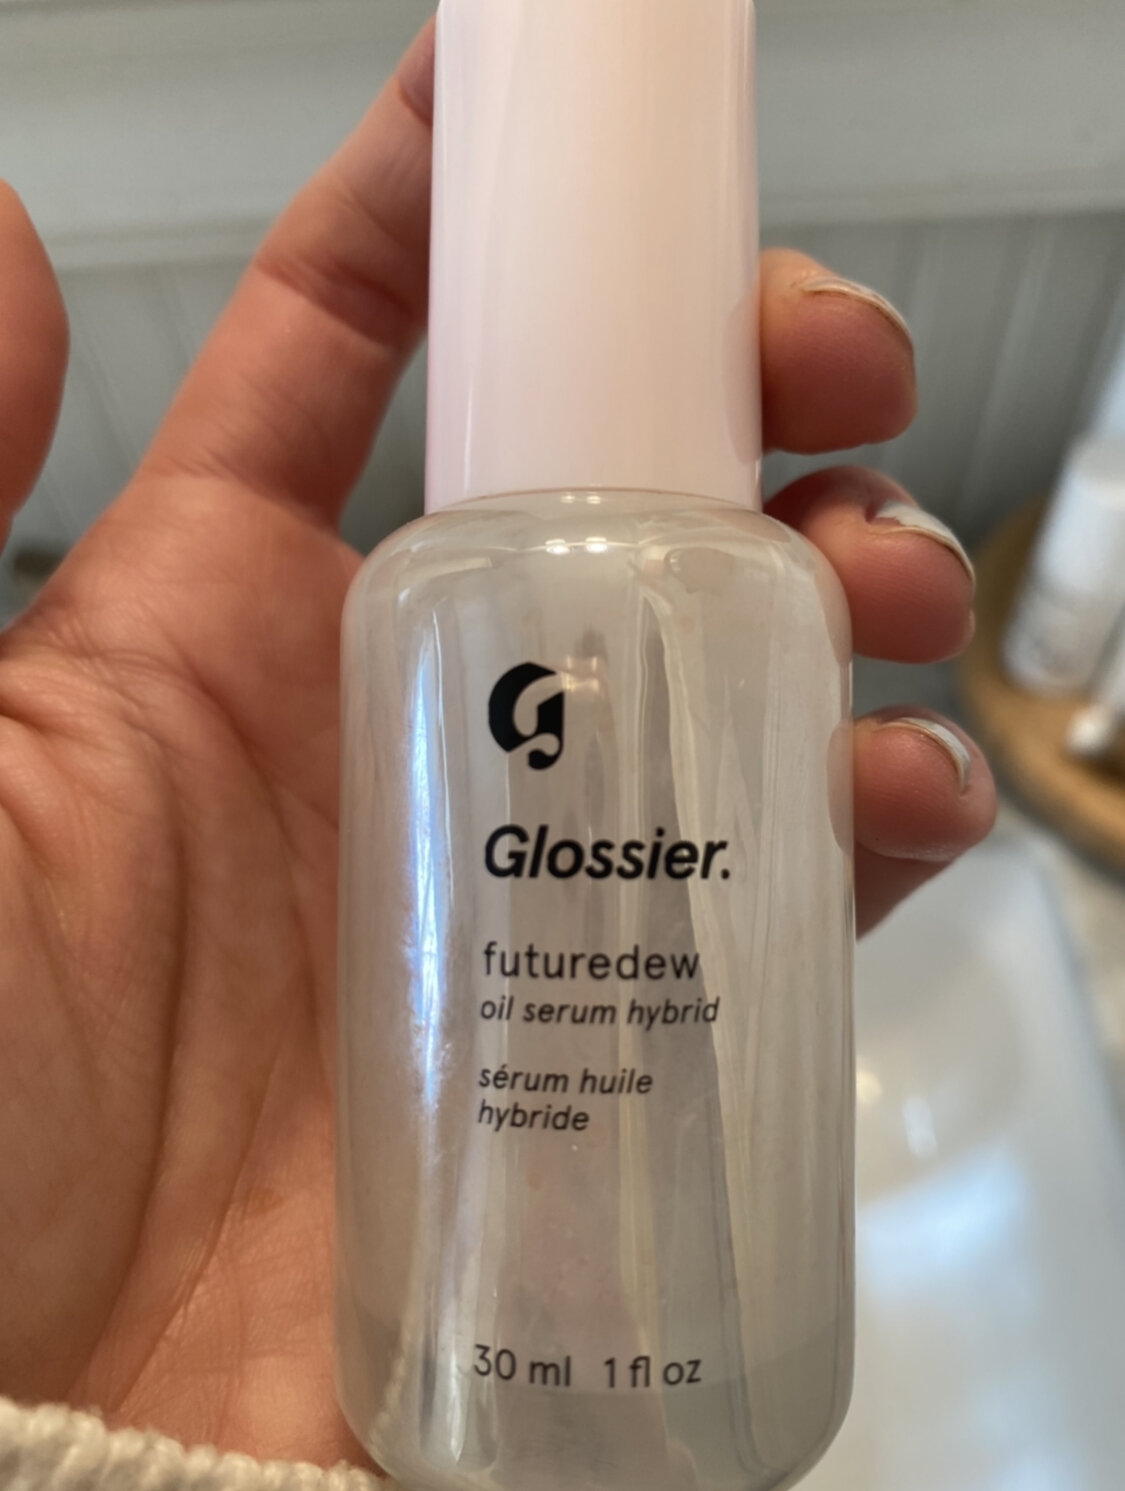  - Glossier FuturedewI’ve tried a few Glossier products over the years and I have to be honest. I wasn’t impressed with them at all until I tried this Futuredew serum. If you struggle with your skin getting oily throughout the day, this isn’t for you. However, if you feel like your skin can look dull and want more of a glow, you need to try this! I like using it right before I put my makeup on as a primer and you can see a huge difference in the glow under your makeup. I’ve recommended this to friends and they have told me they are so glad they bought it! I also weirdly love the smell.Shop Glossier Futuredew here